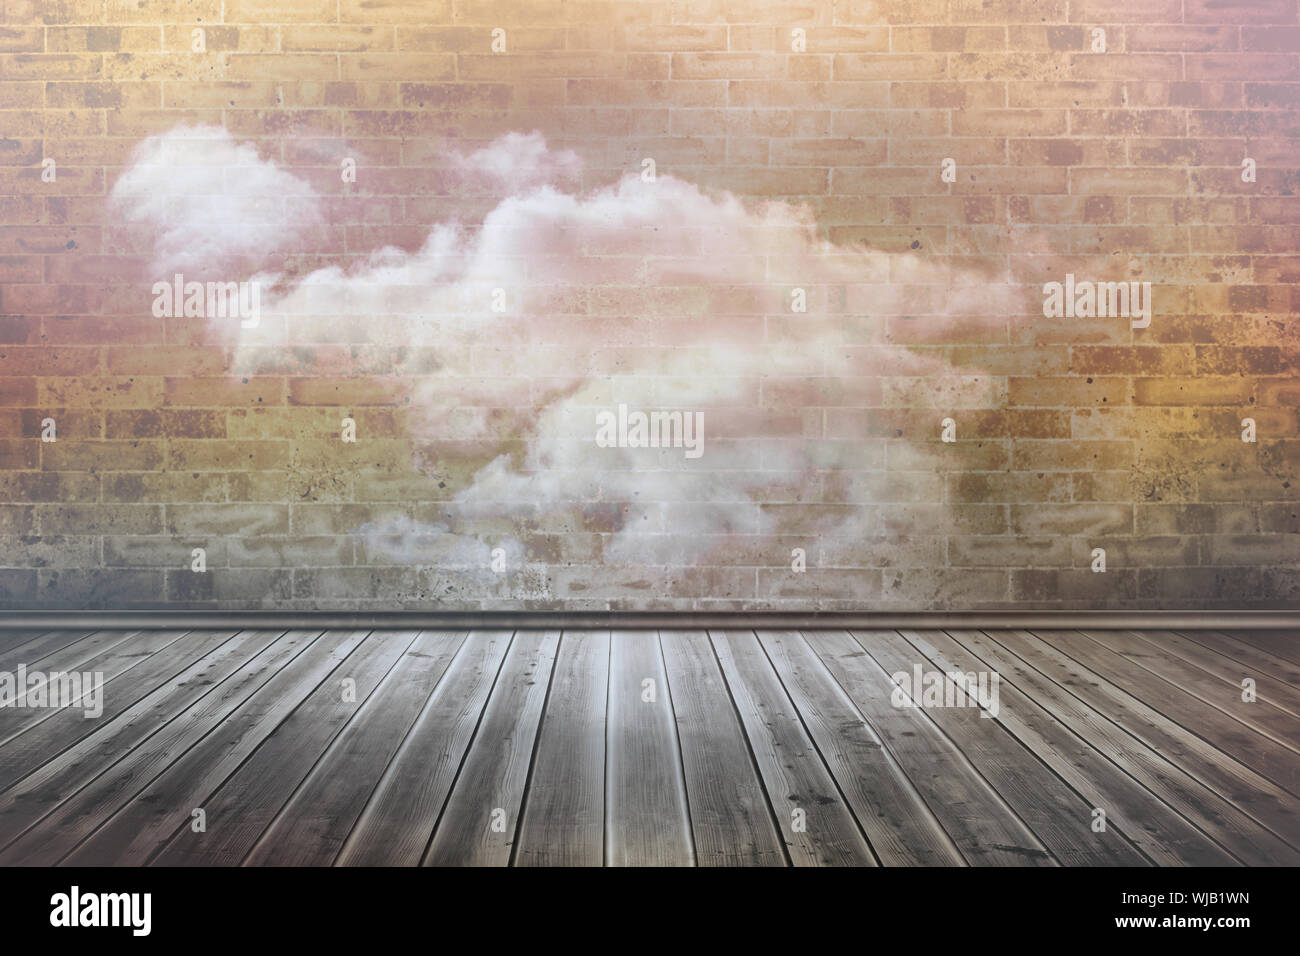 Clouds in a room Stock Photo